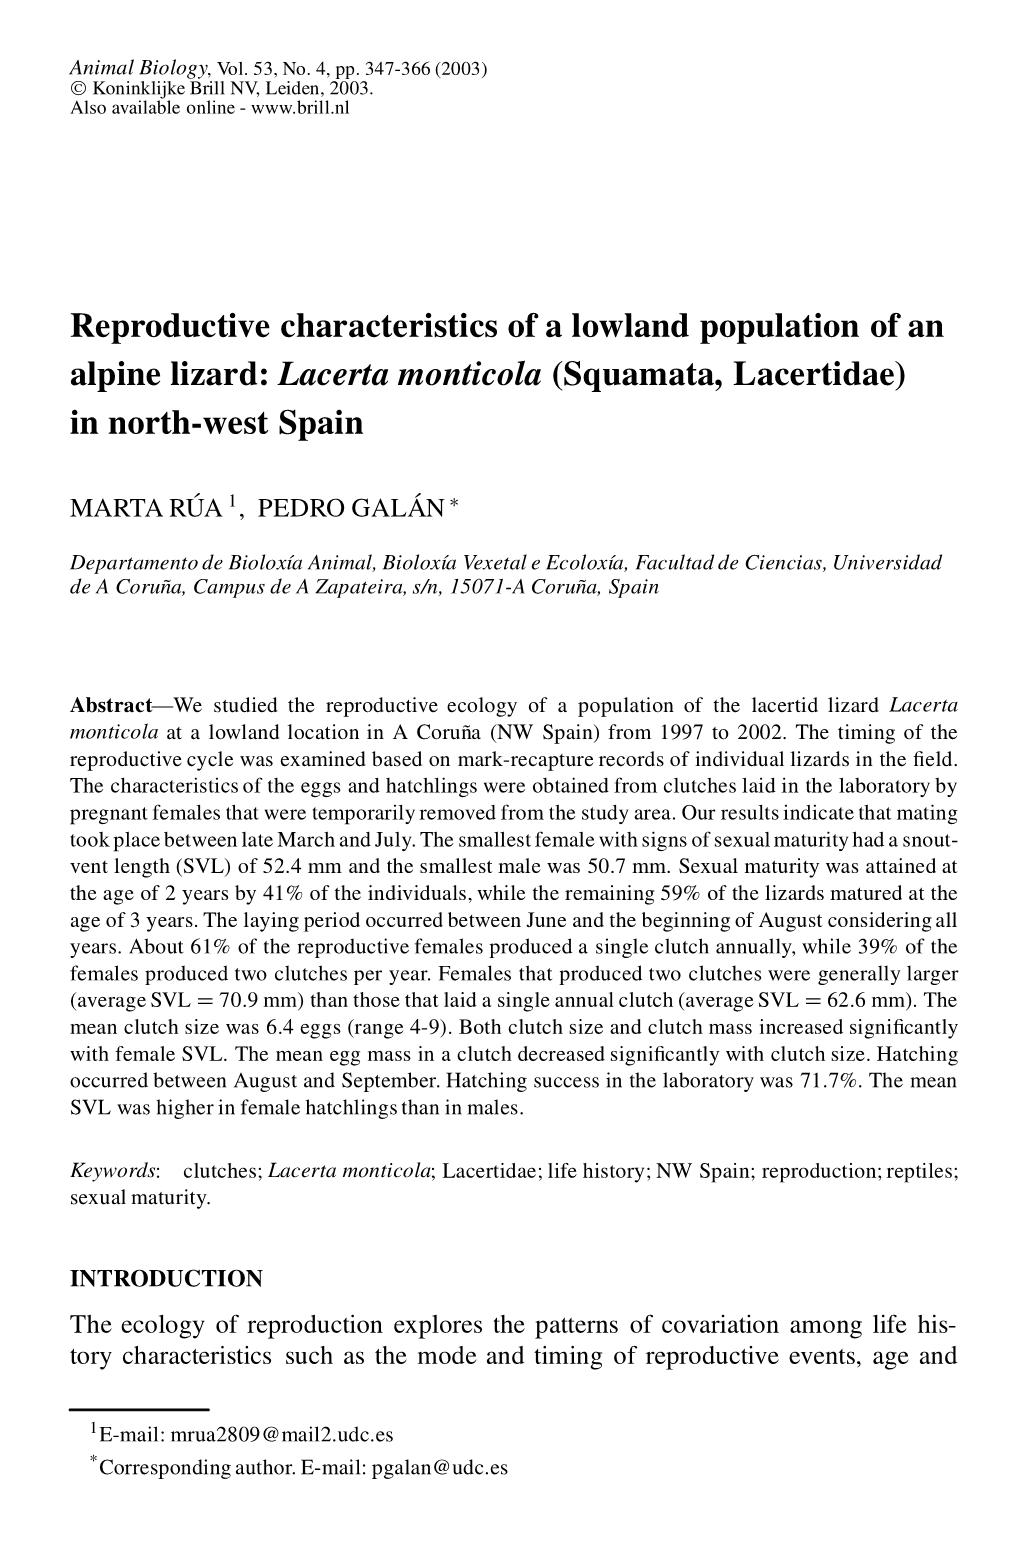 Reproductive Characteristics of a Lowland Population of an Alpine